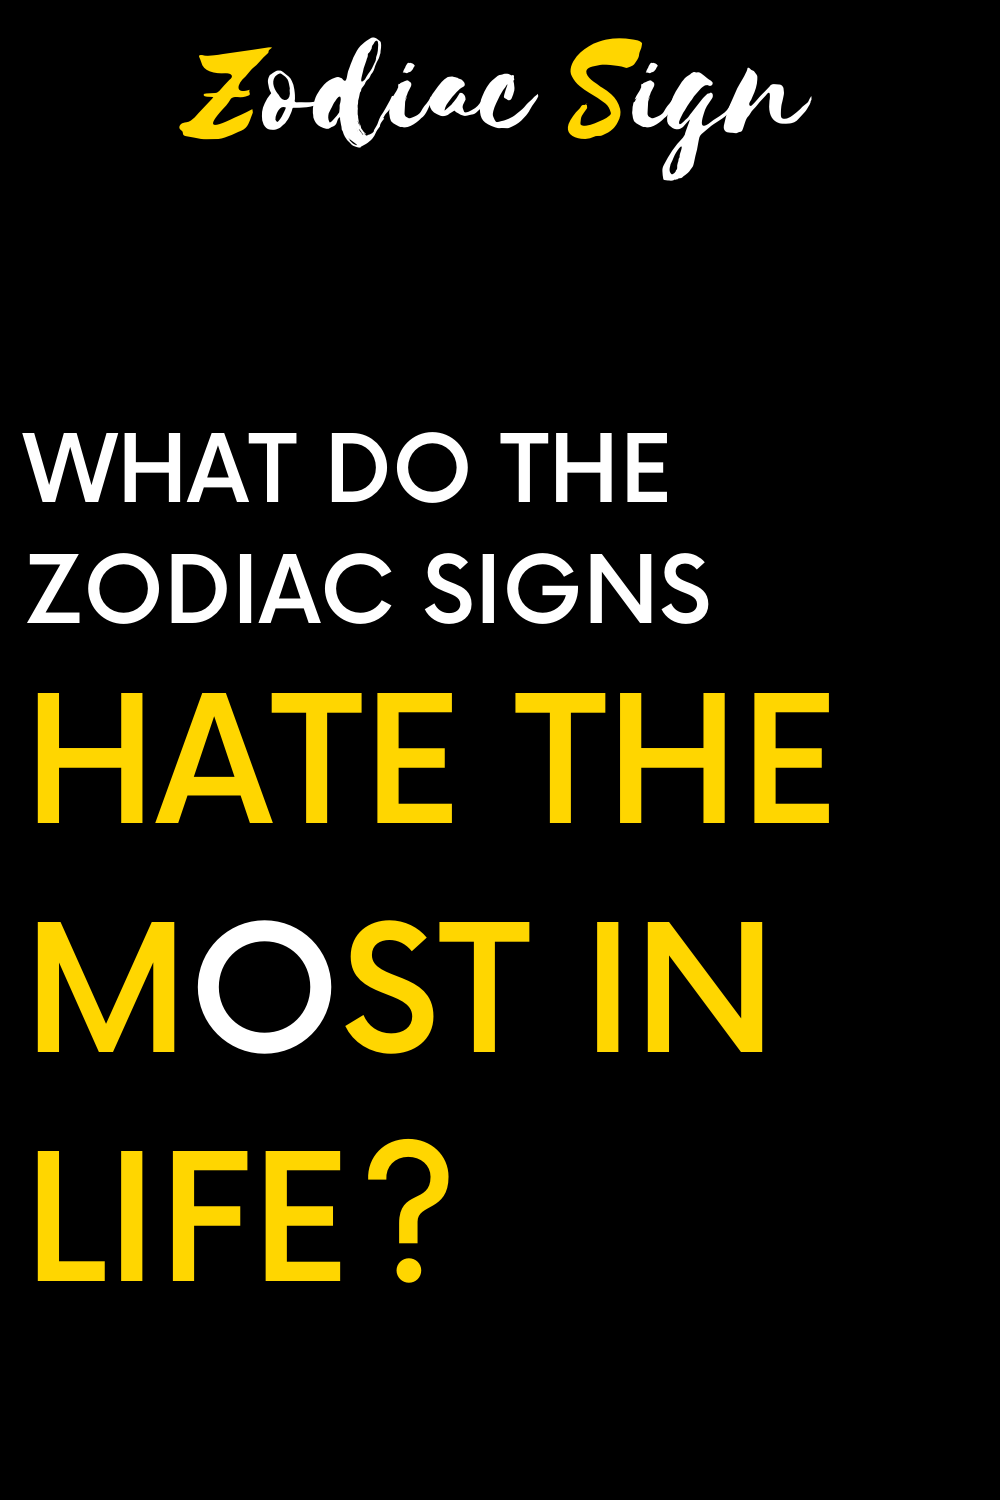 What do the zodiac signs hate the most in life?